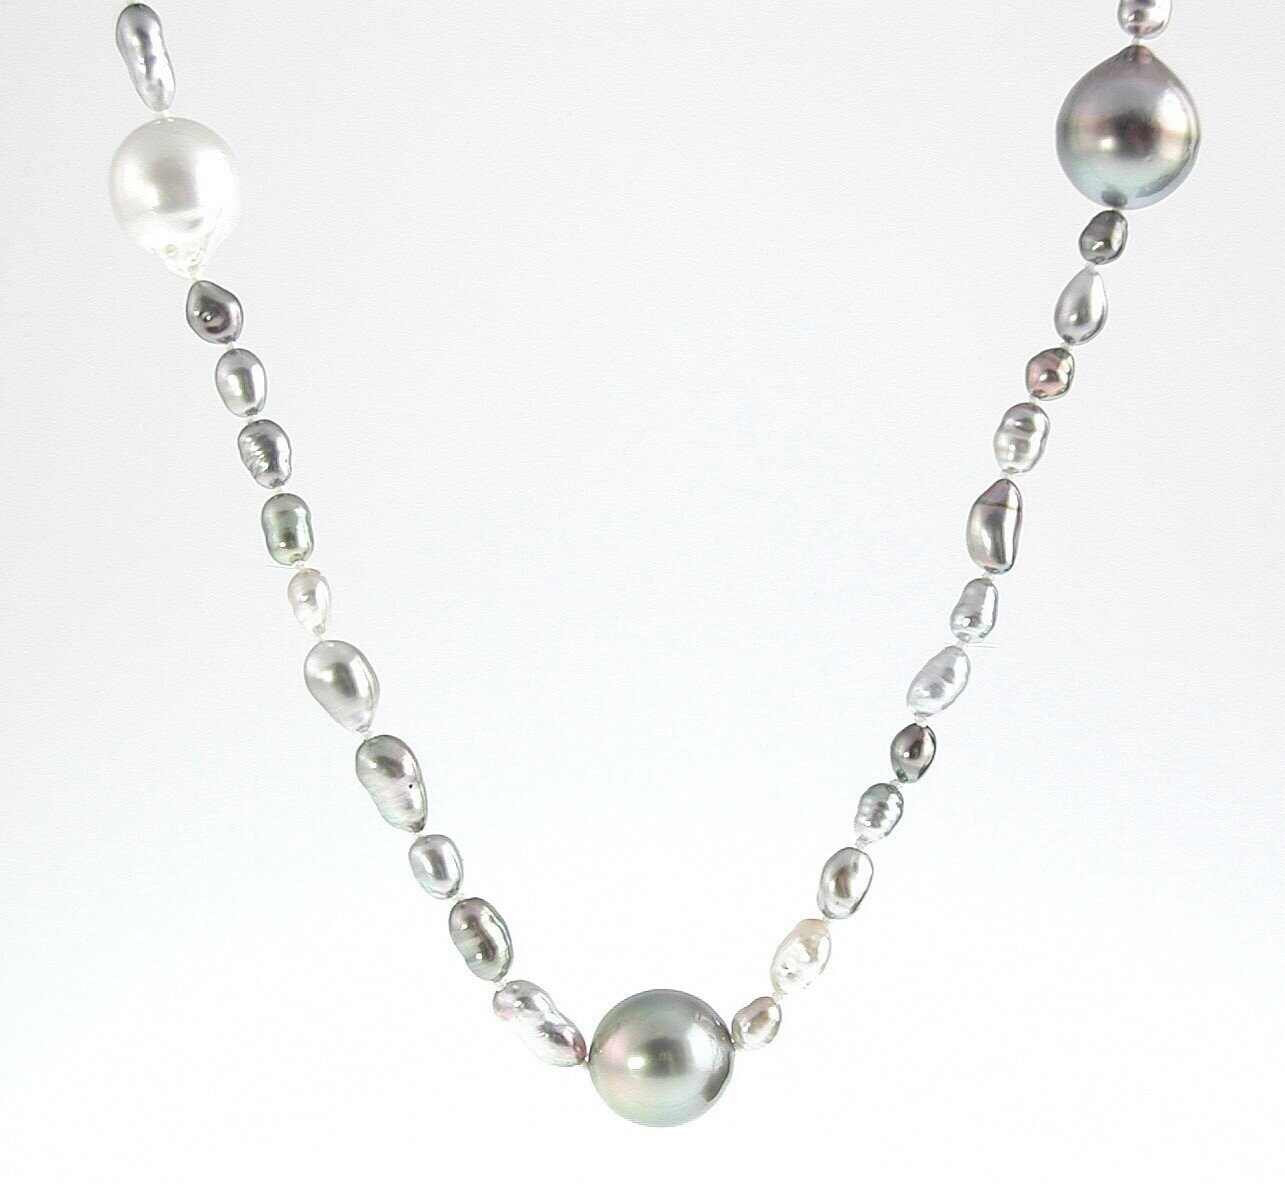 BAROQUE "ENDLESS" PEARL NECKLACE